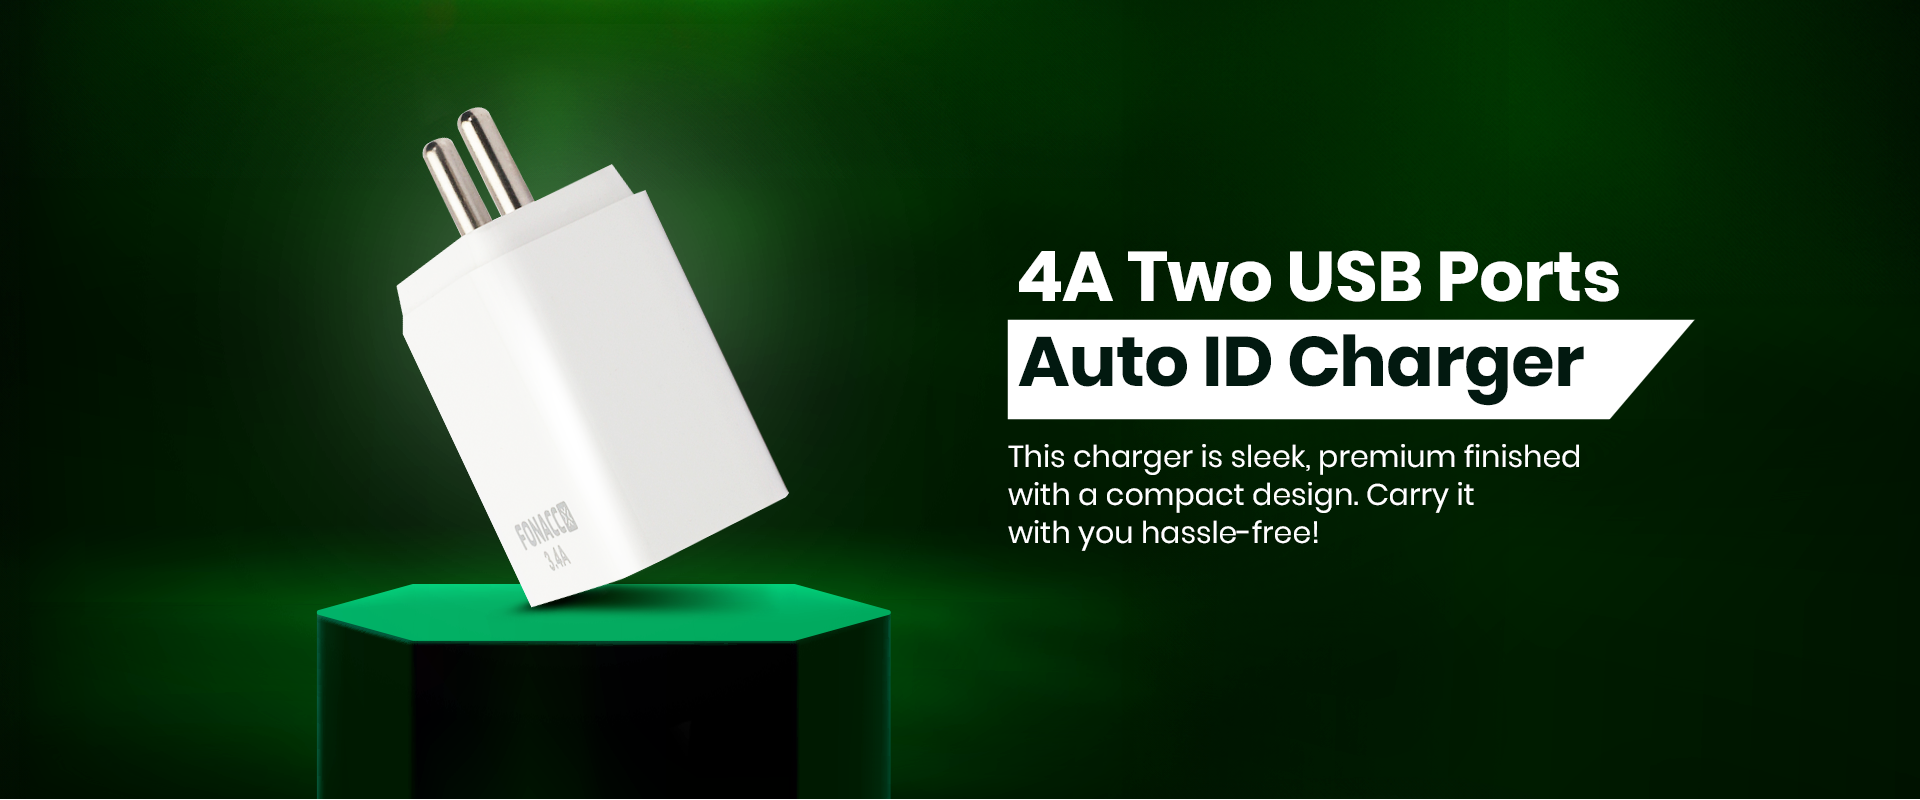 3.4A Two USB Ports Auto ID Charger